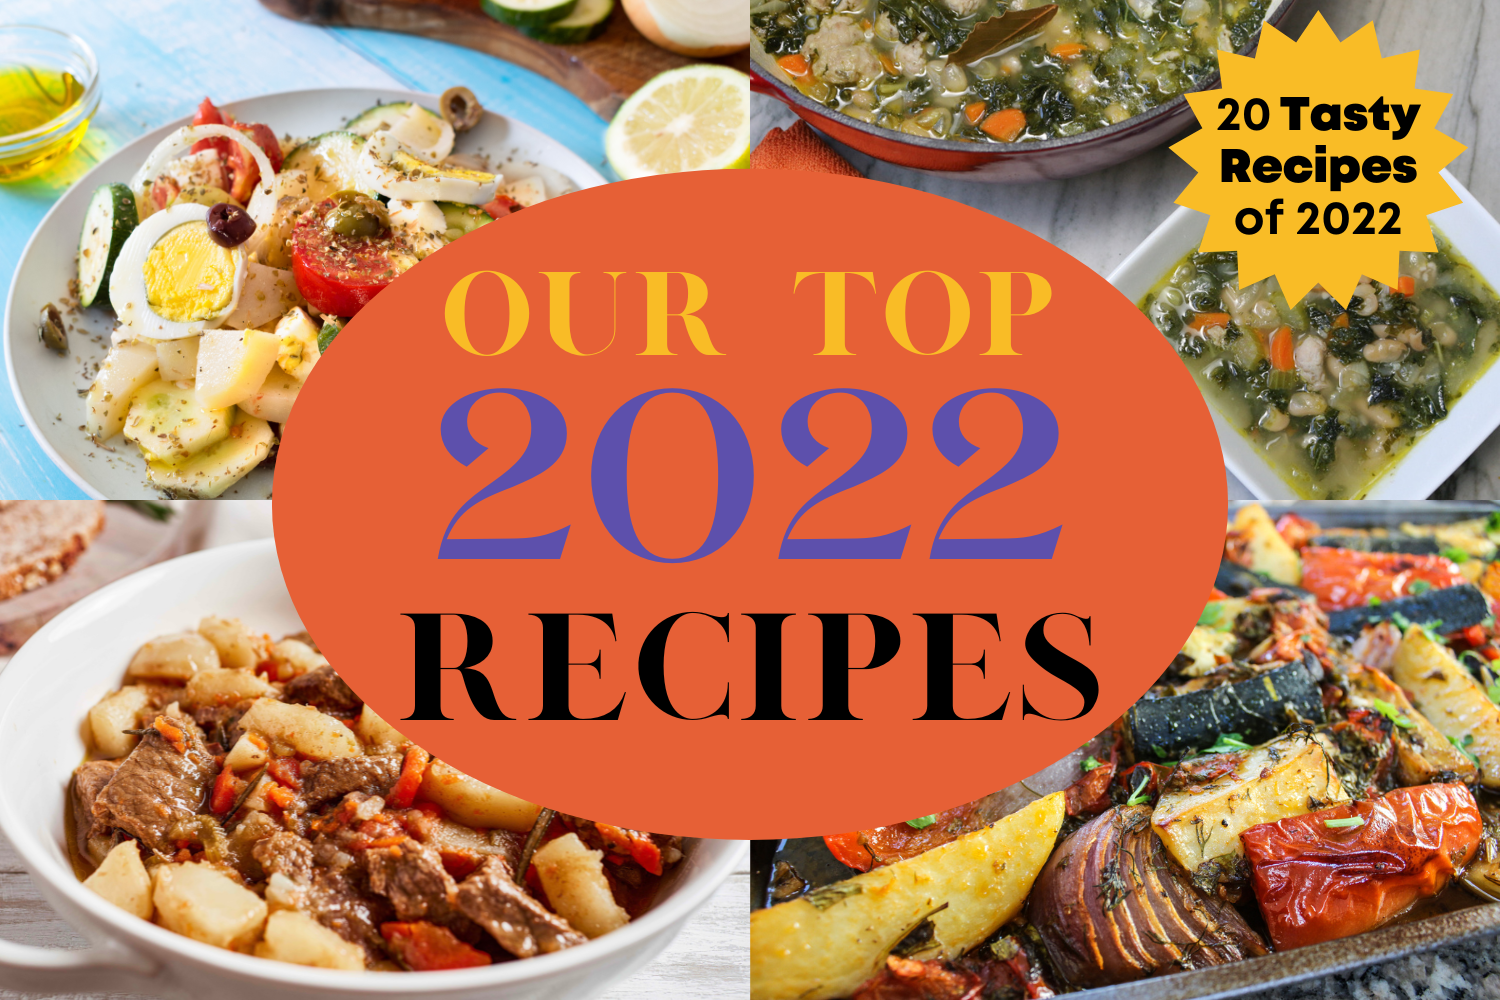 Our Top 20 Mediterranean Diet Recipes of 2022